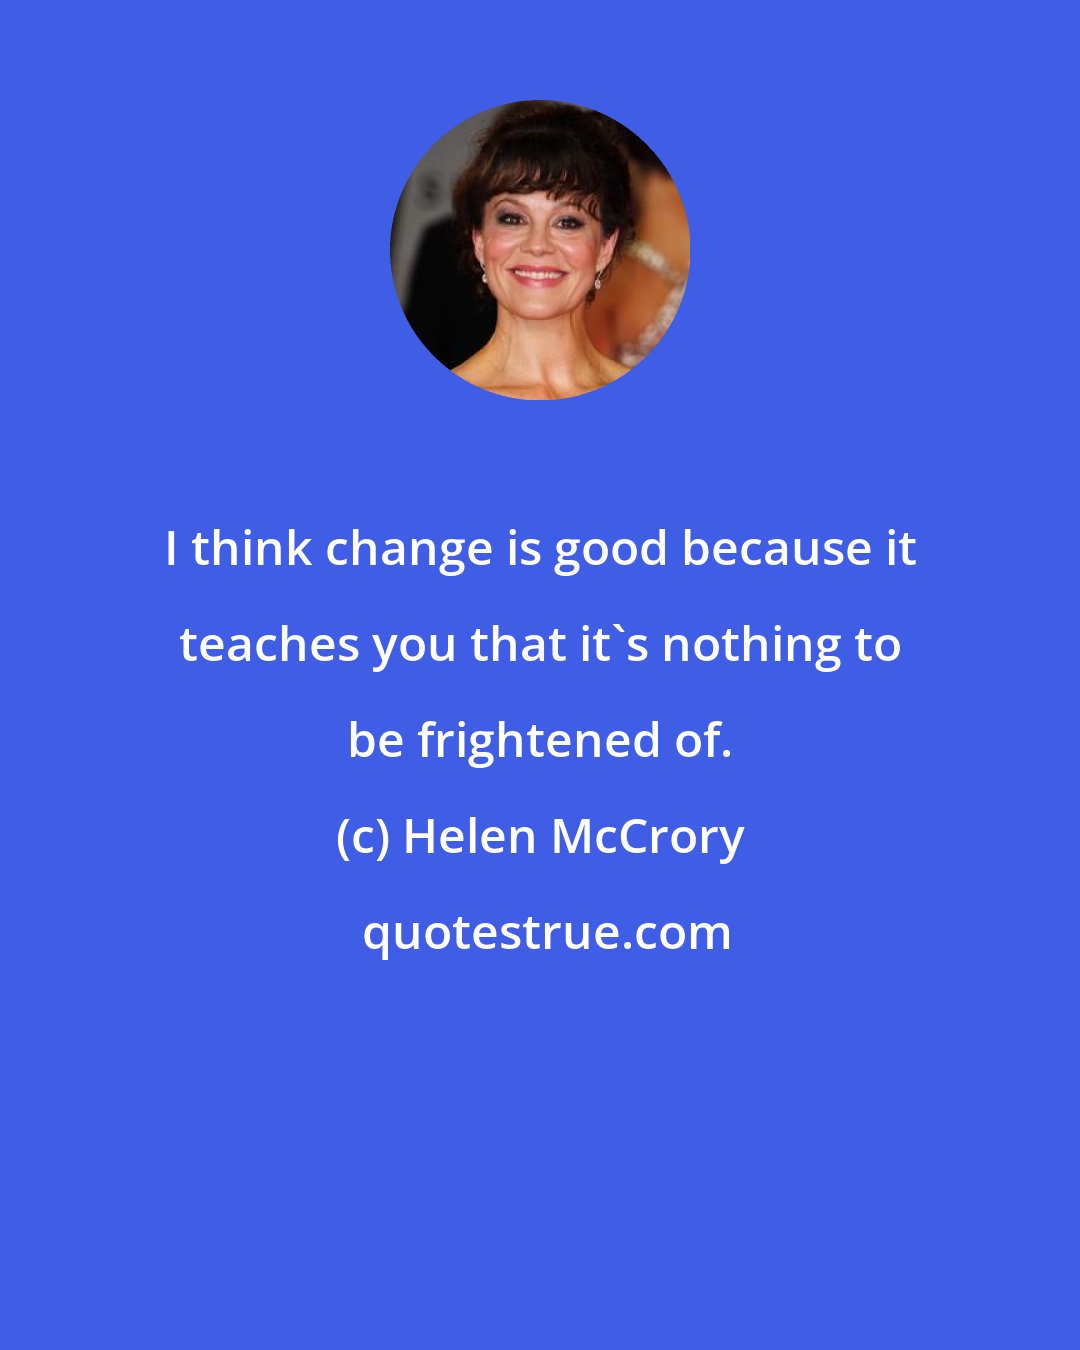 Helen McCrory: I think change is good because it teaches you that it's nothing to be frightened of.